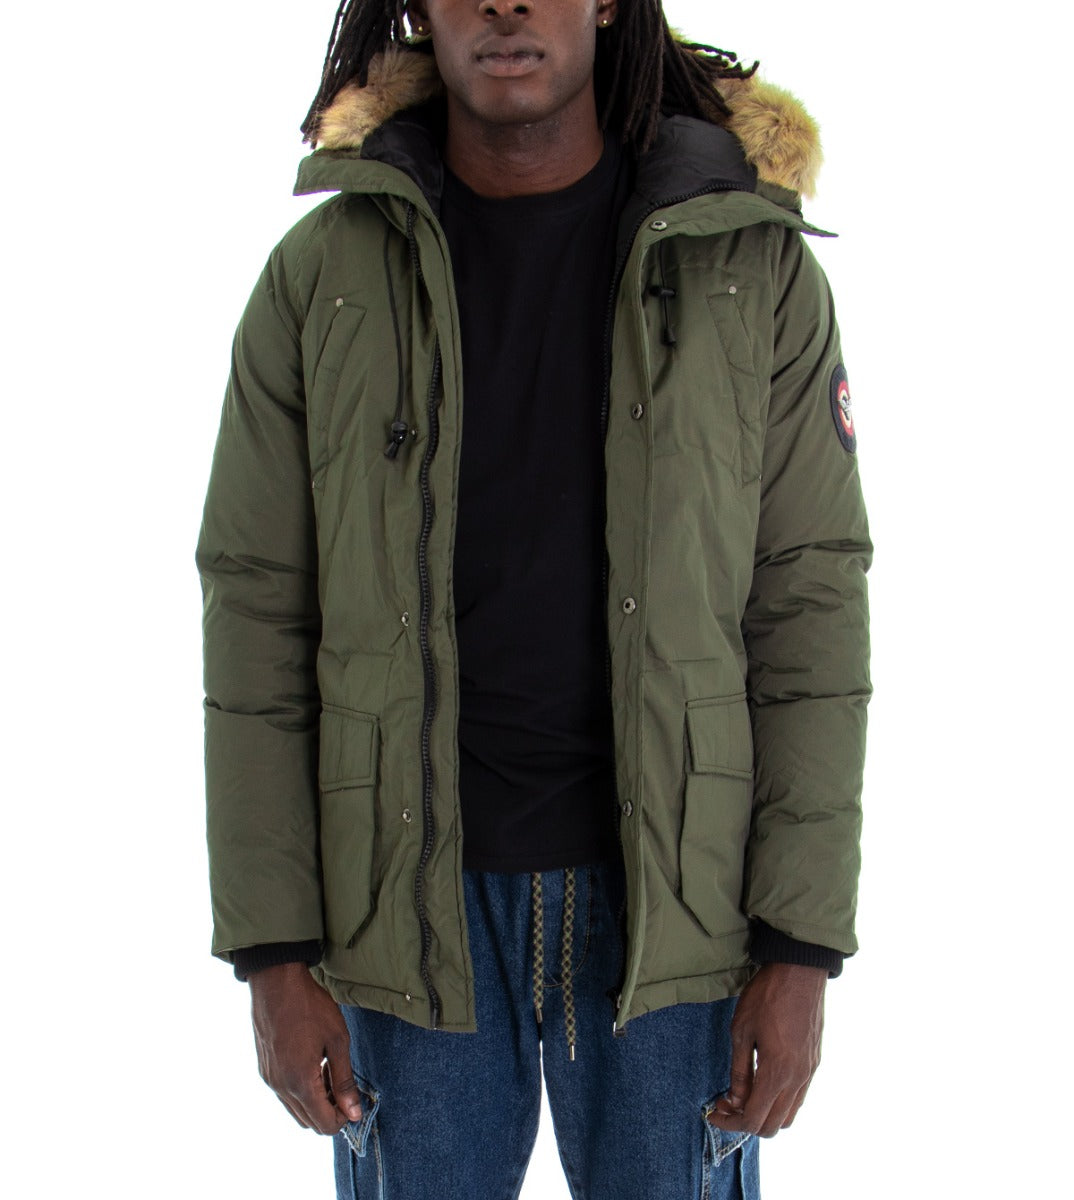 Parka Men's Fur Hood Quilted Jacket Solid Color Green GIOSAL